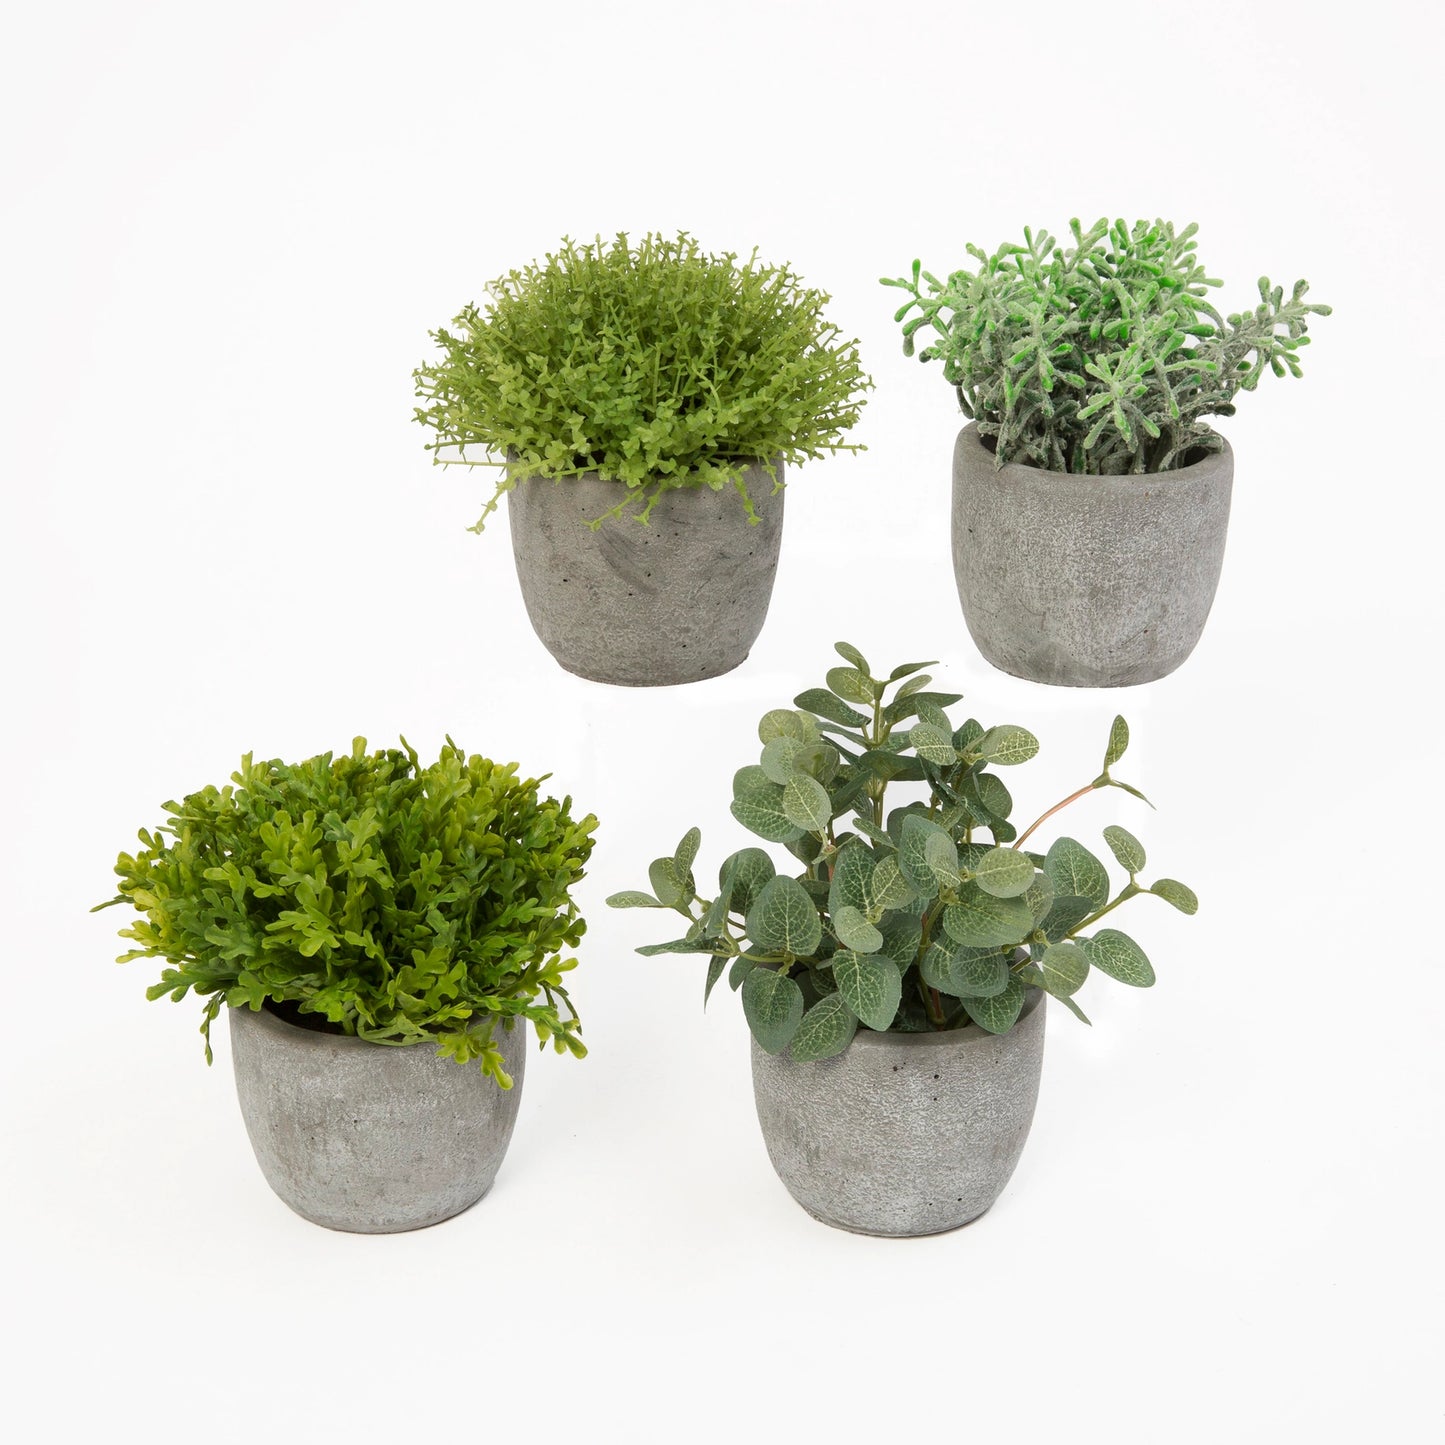 Potted Greenery 6.25"